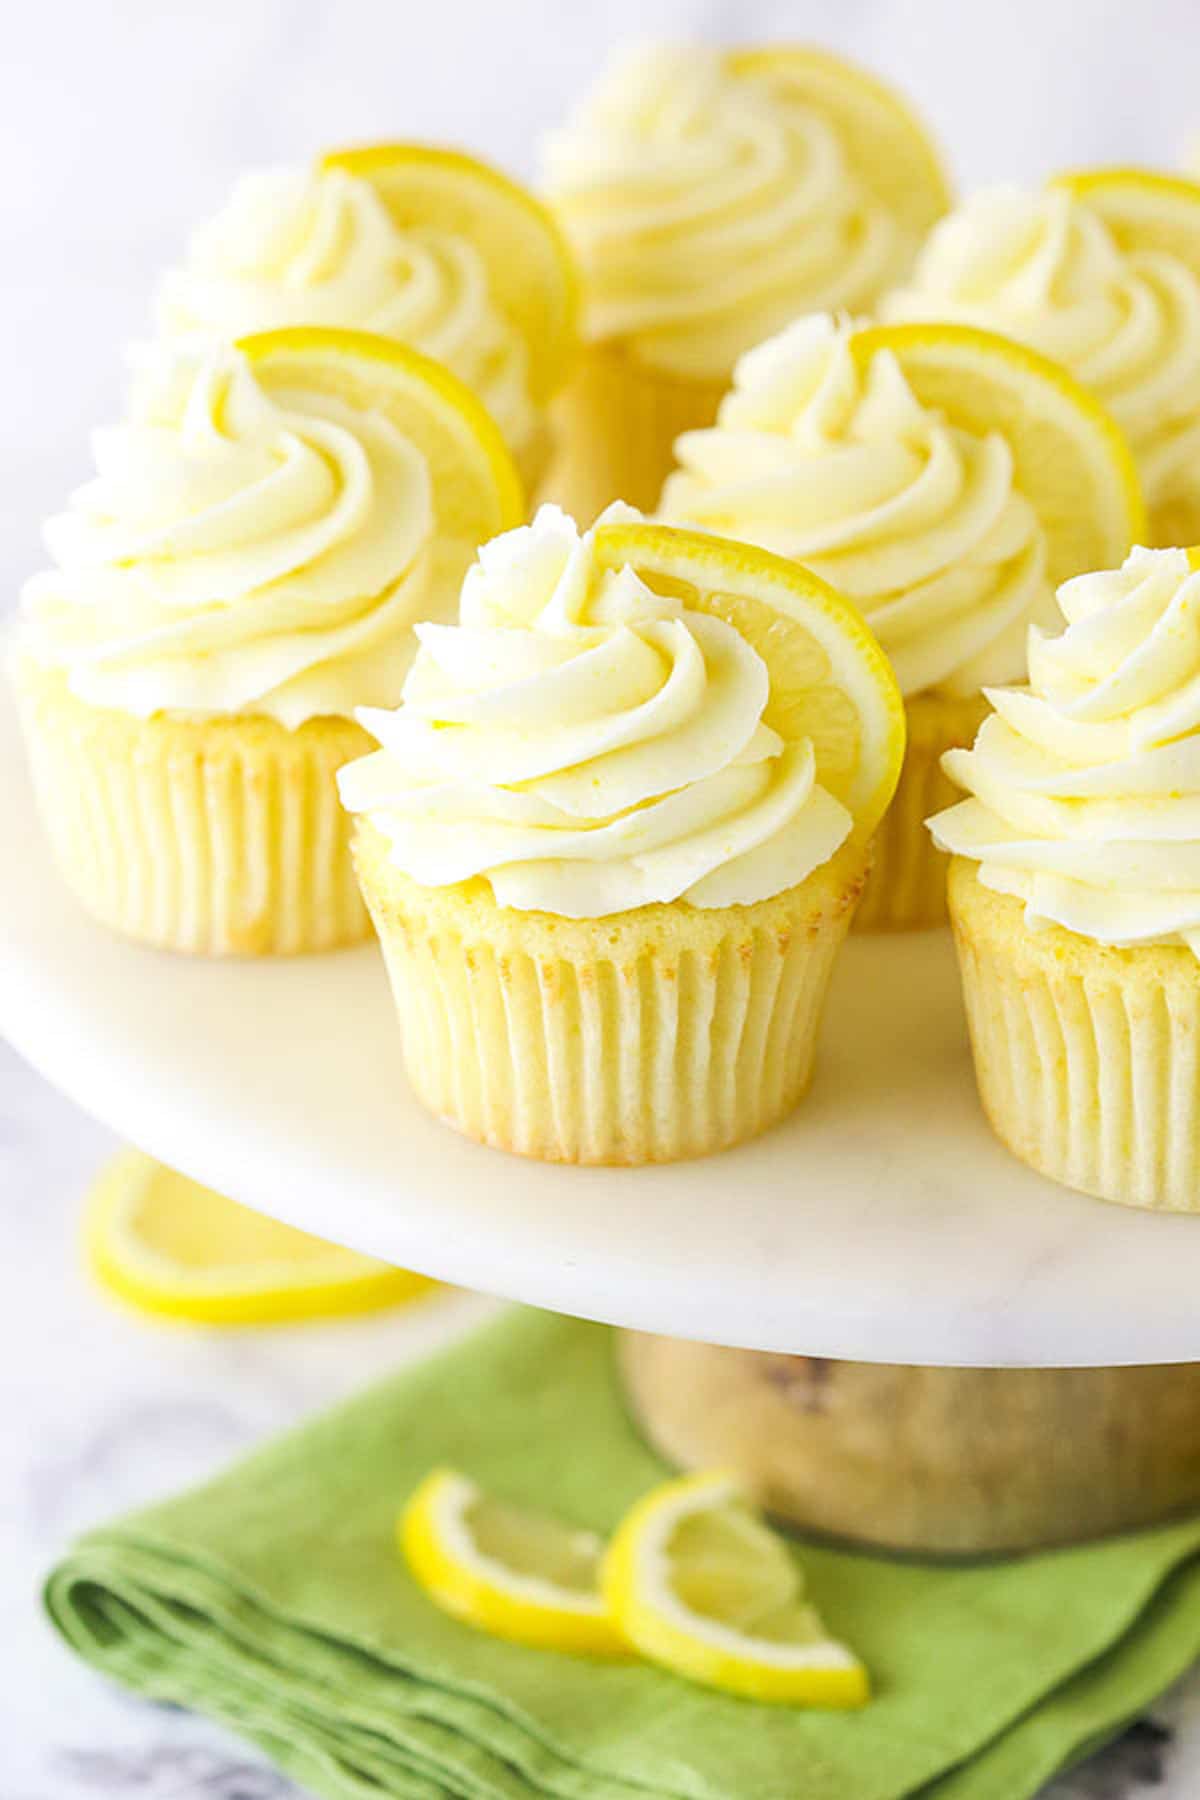 A Cake Stand Holding a Batch of Lemon Cupcakes Garnished with Lemon Slices